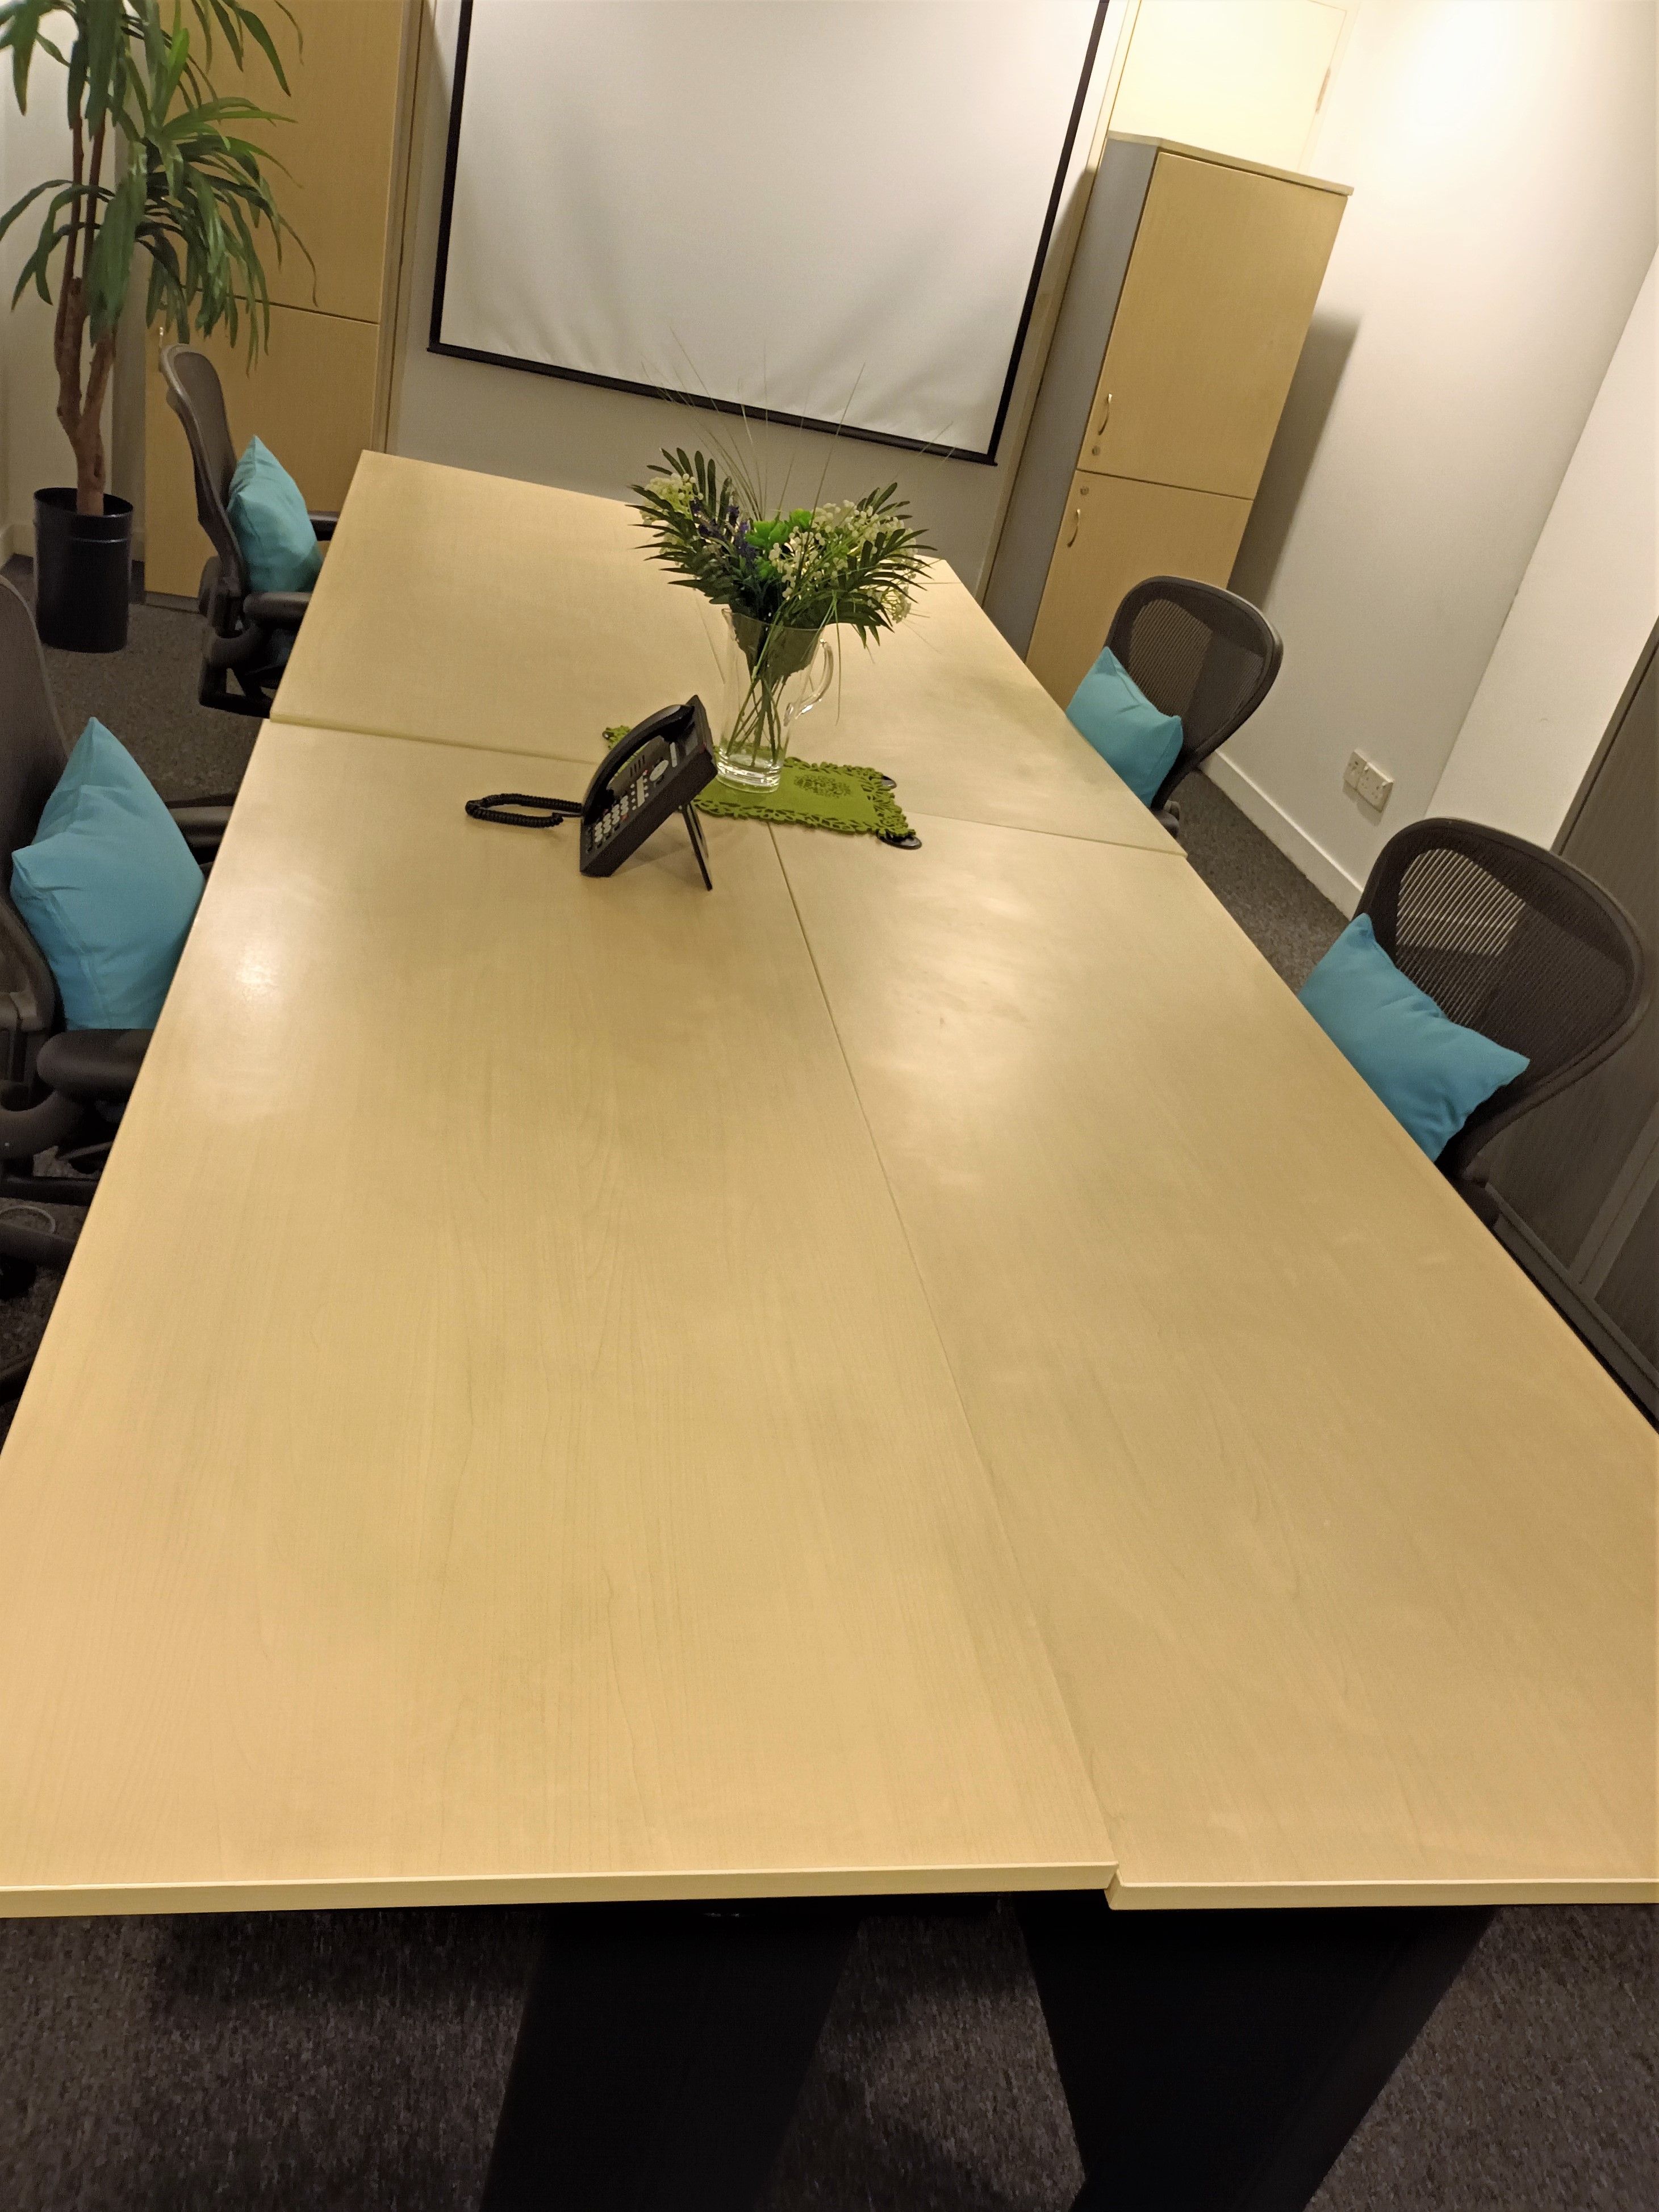 Conference-Room-Picture-1